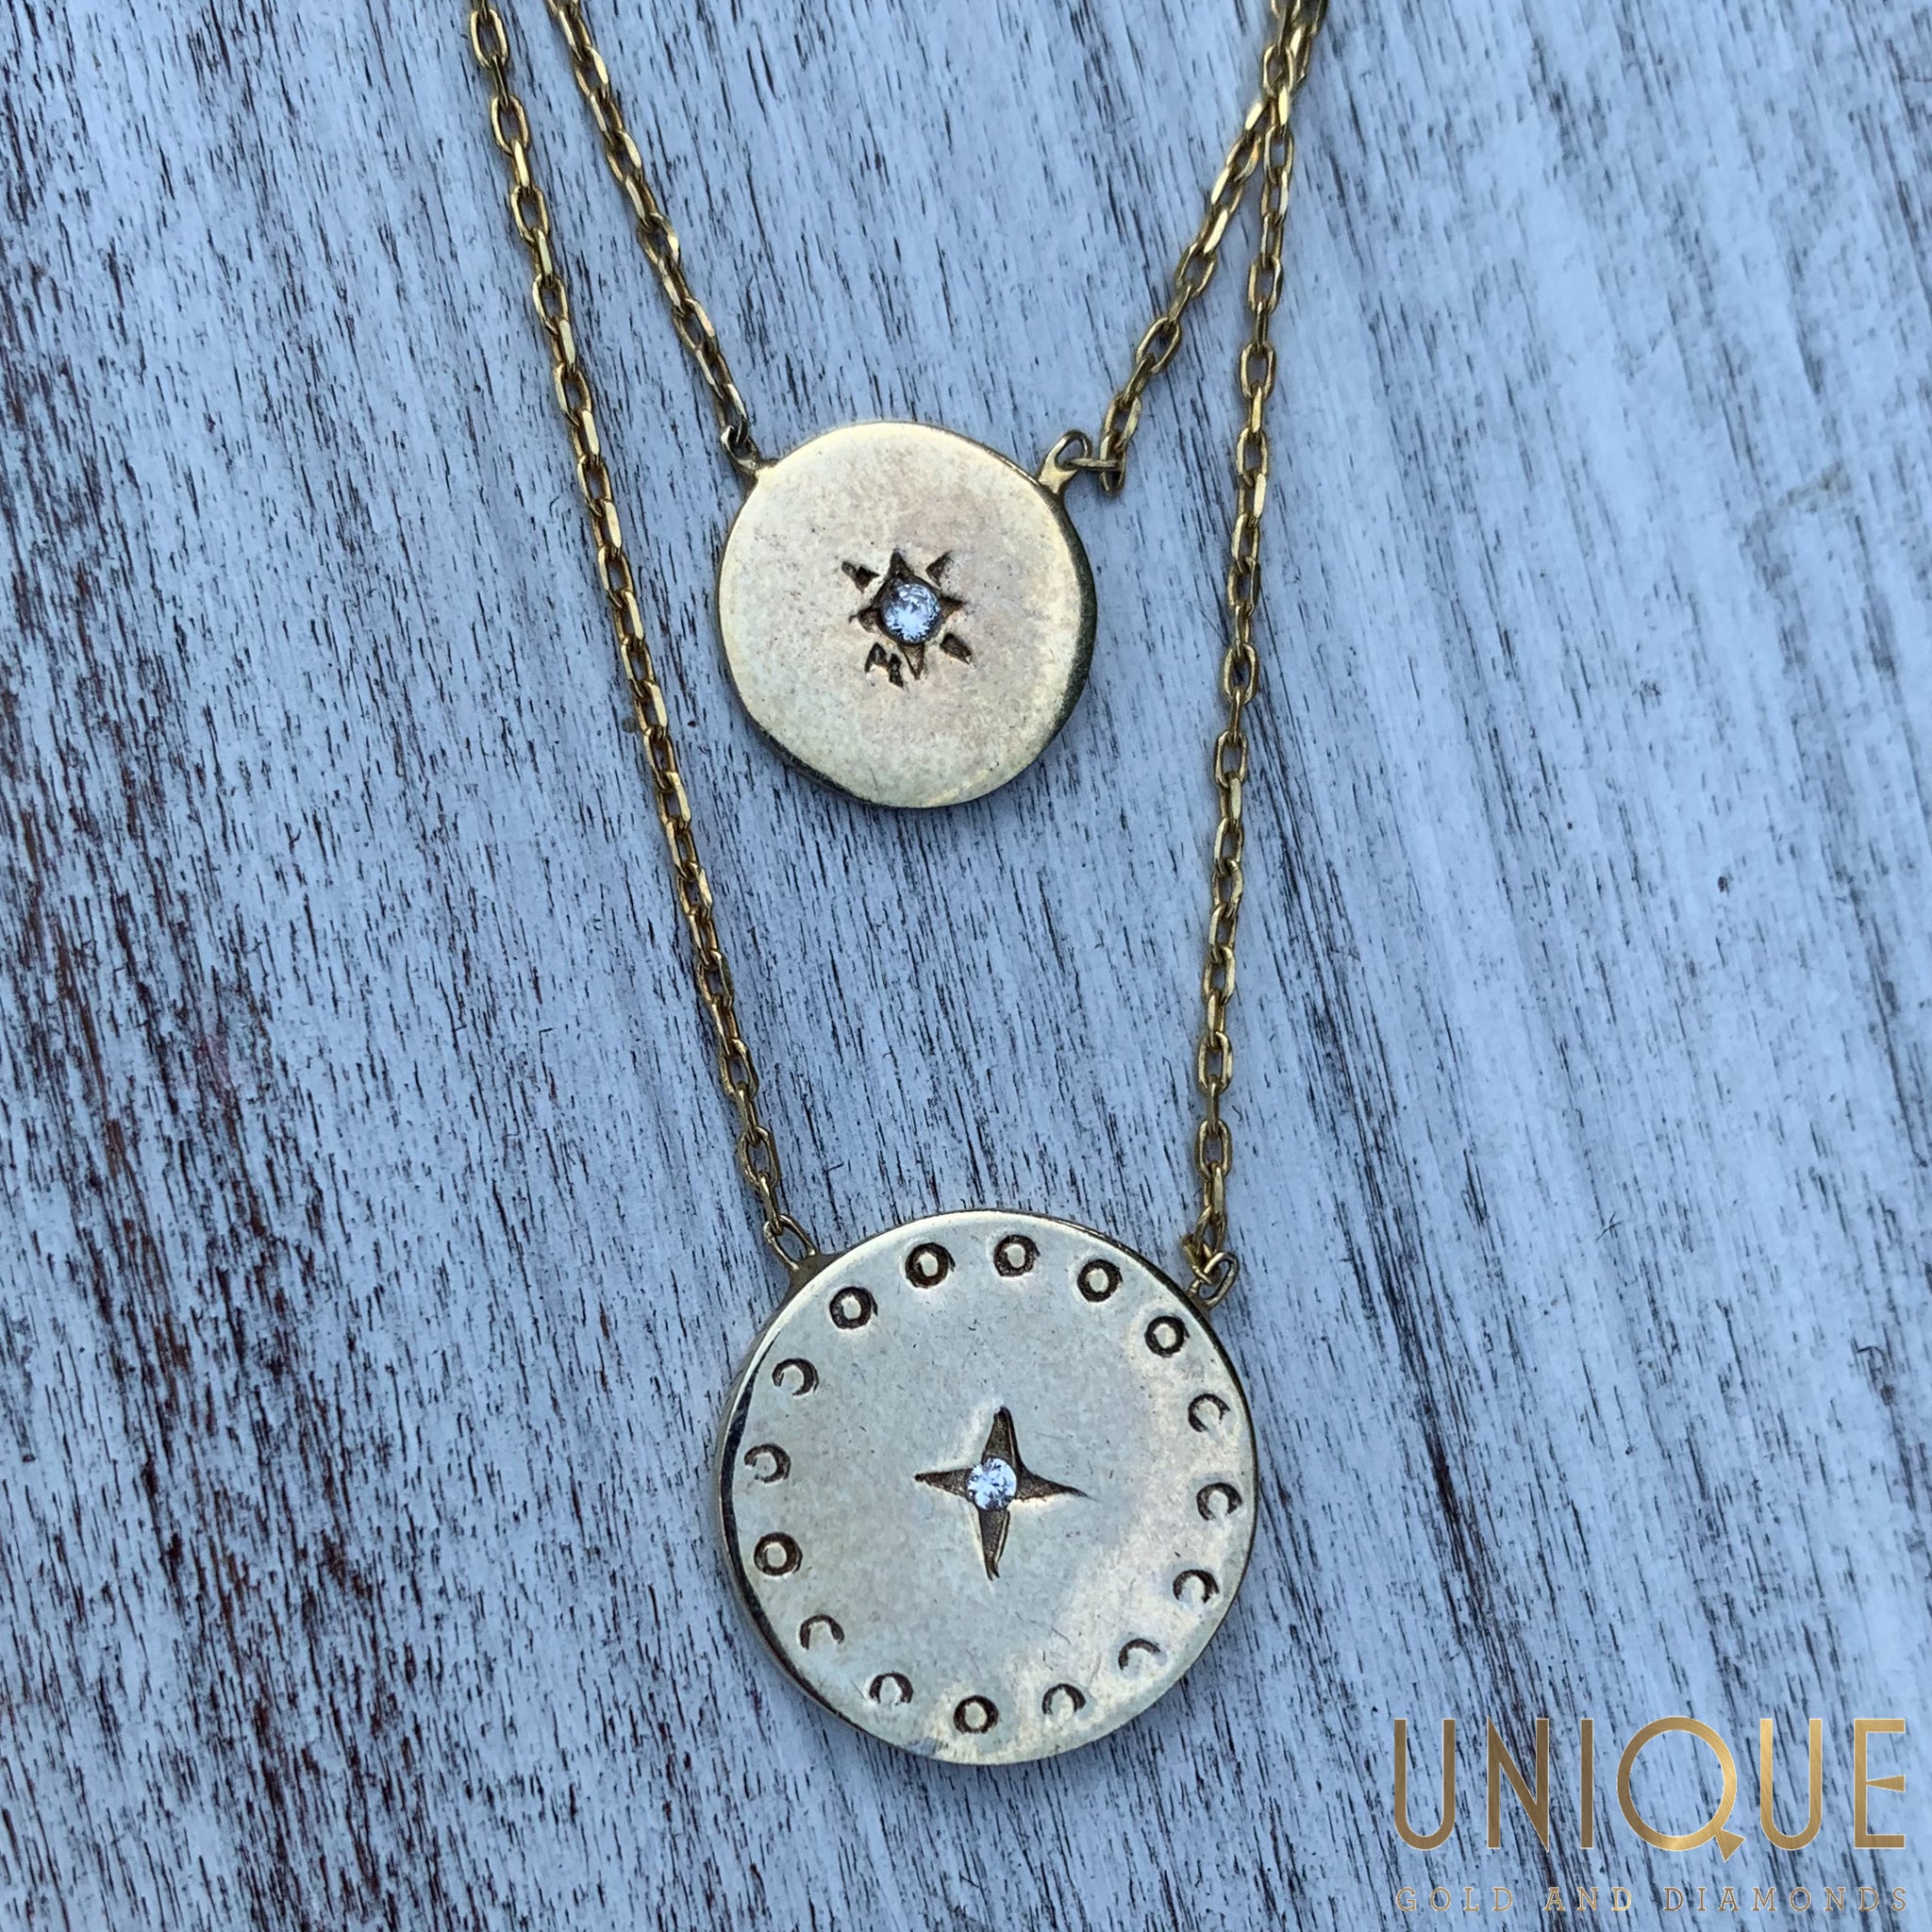 Sterling Silver Gold Plated Two Chains With Round Charms Necklace - Unique  Gold & Diamonds